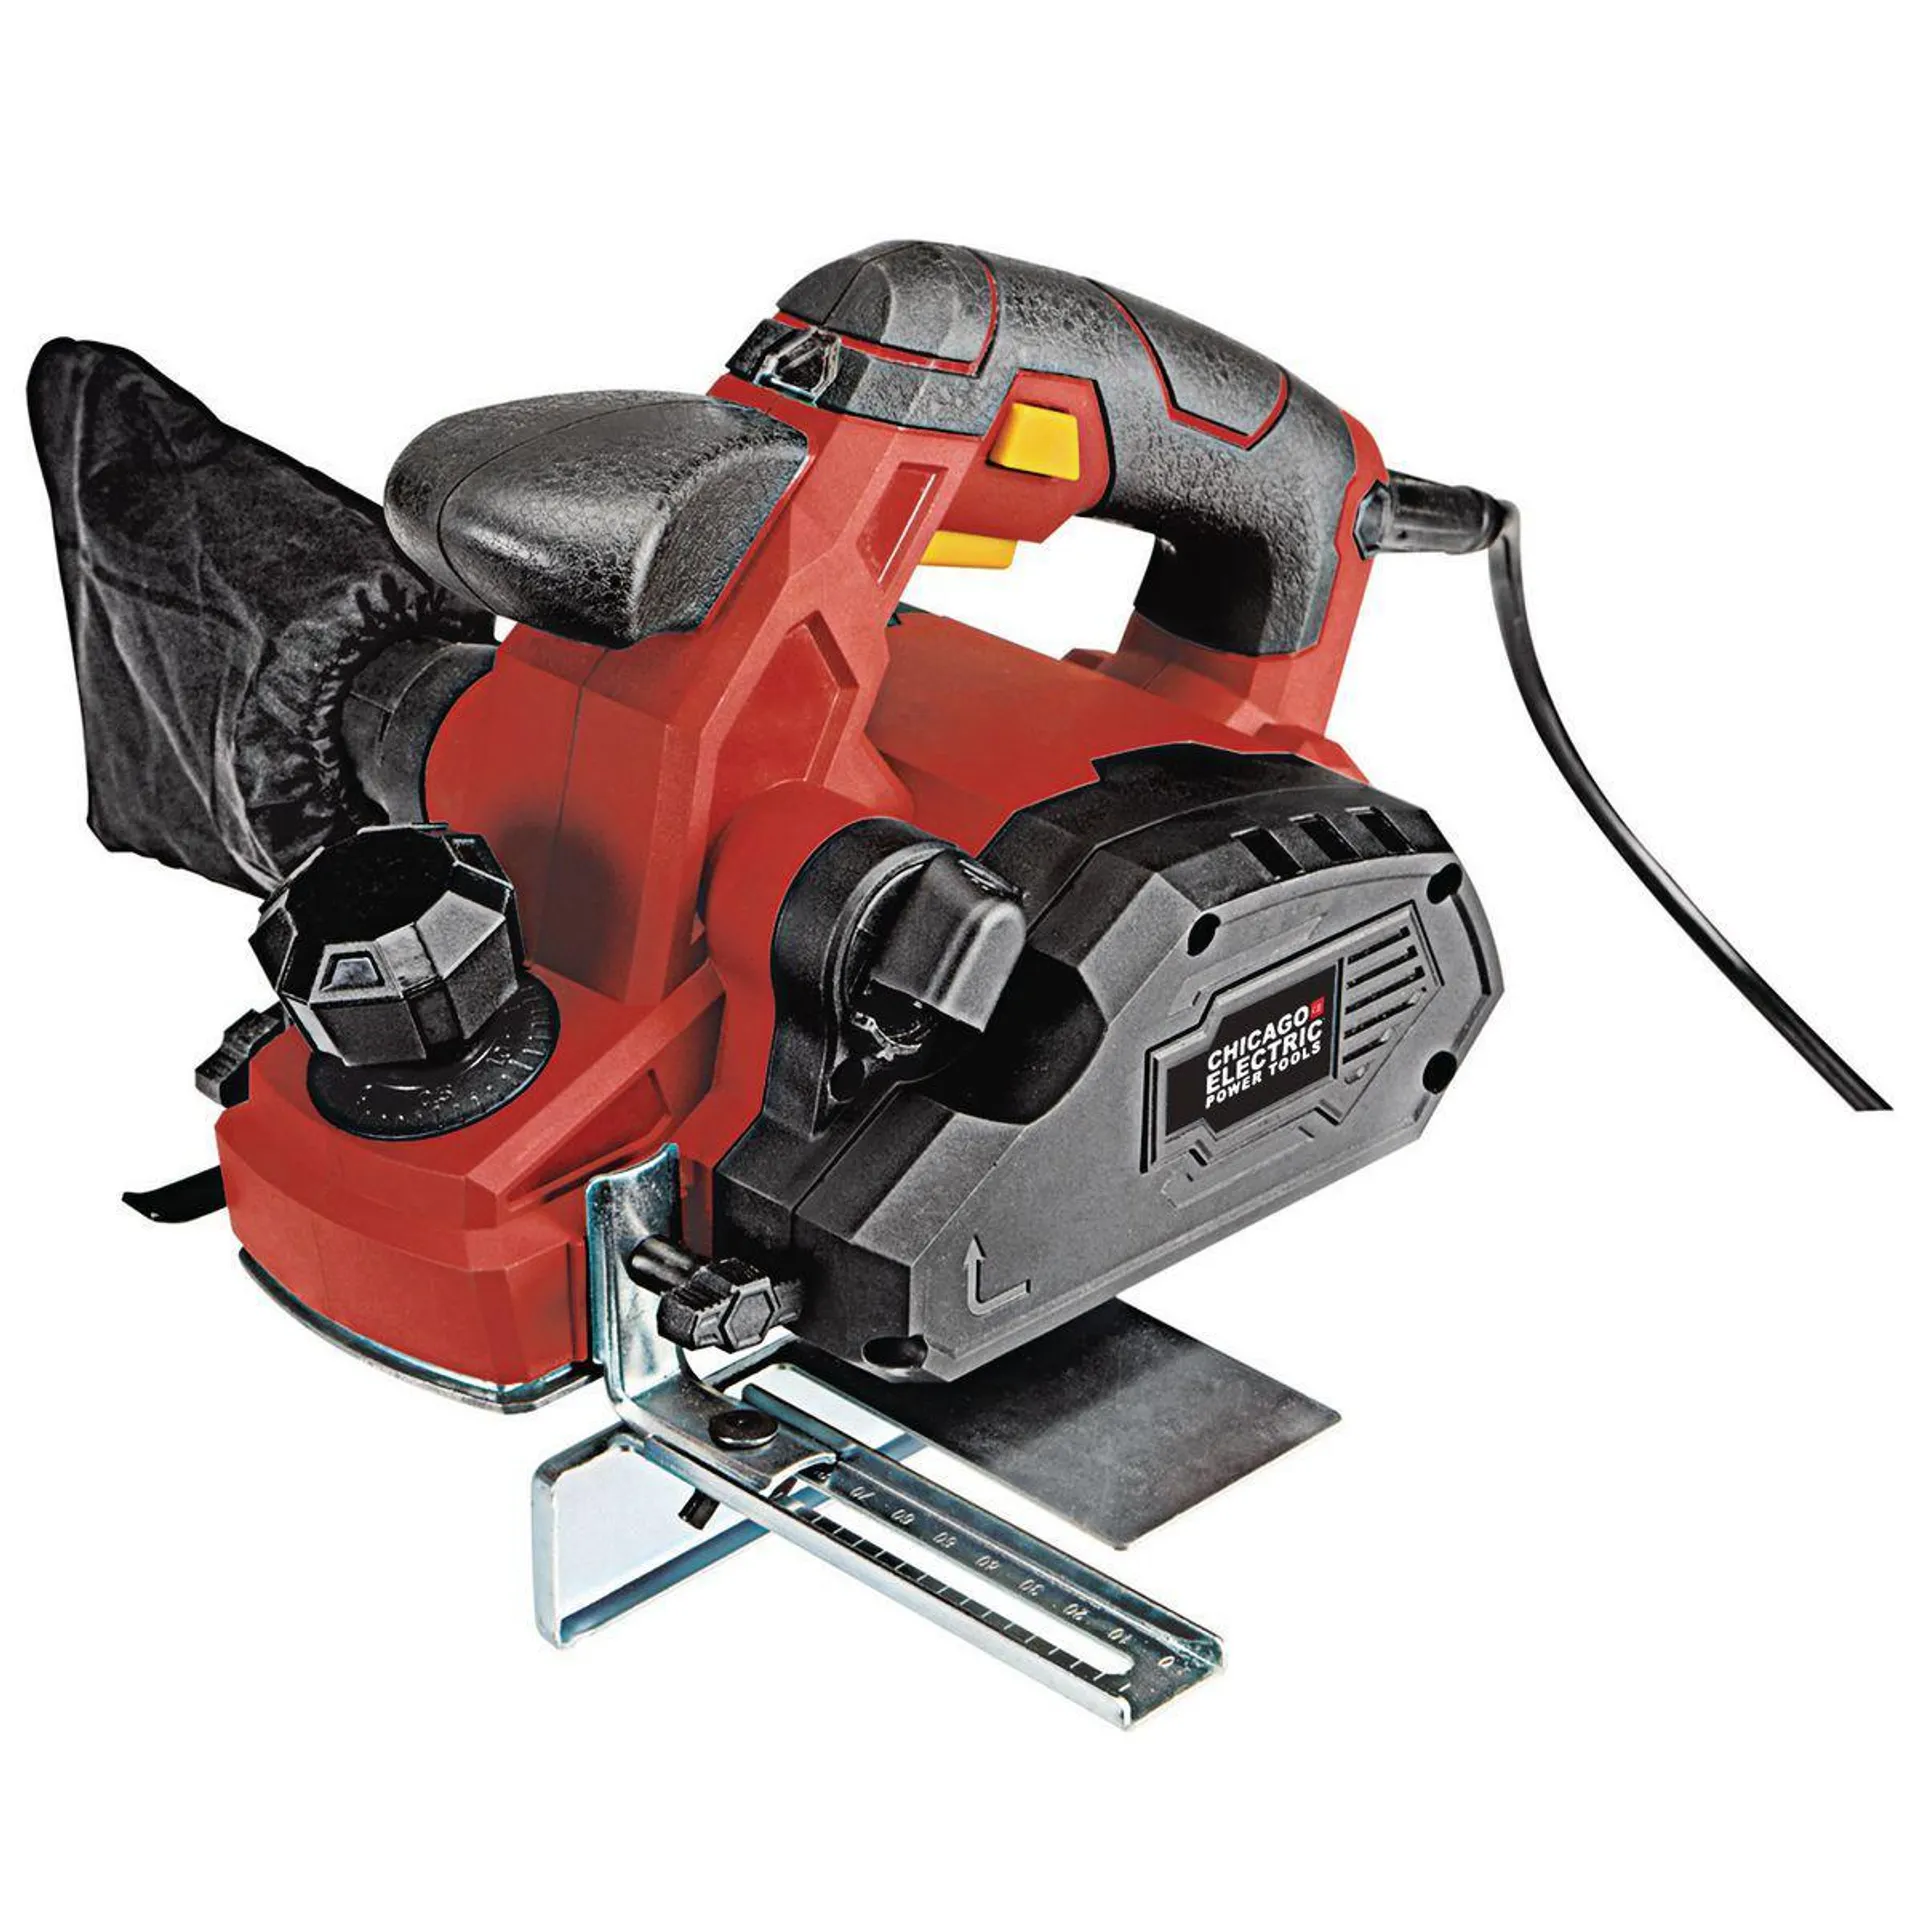 7.5 Amp 3-1/4 in. Planer with Dust Bag